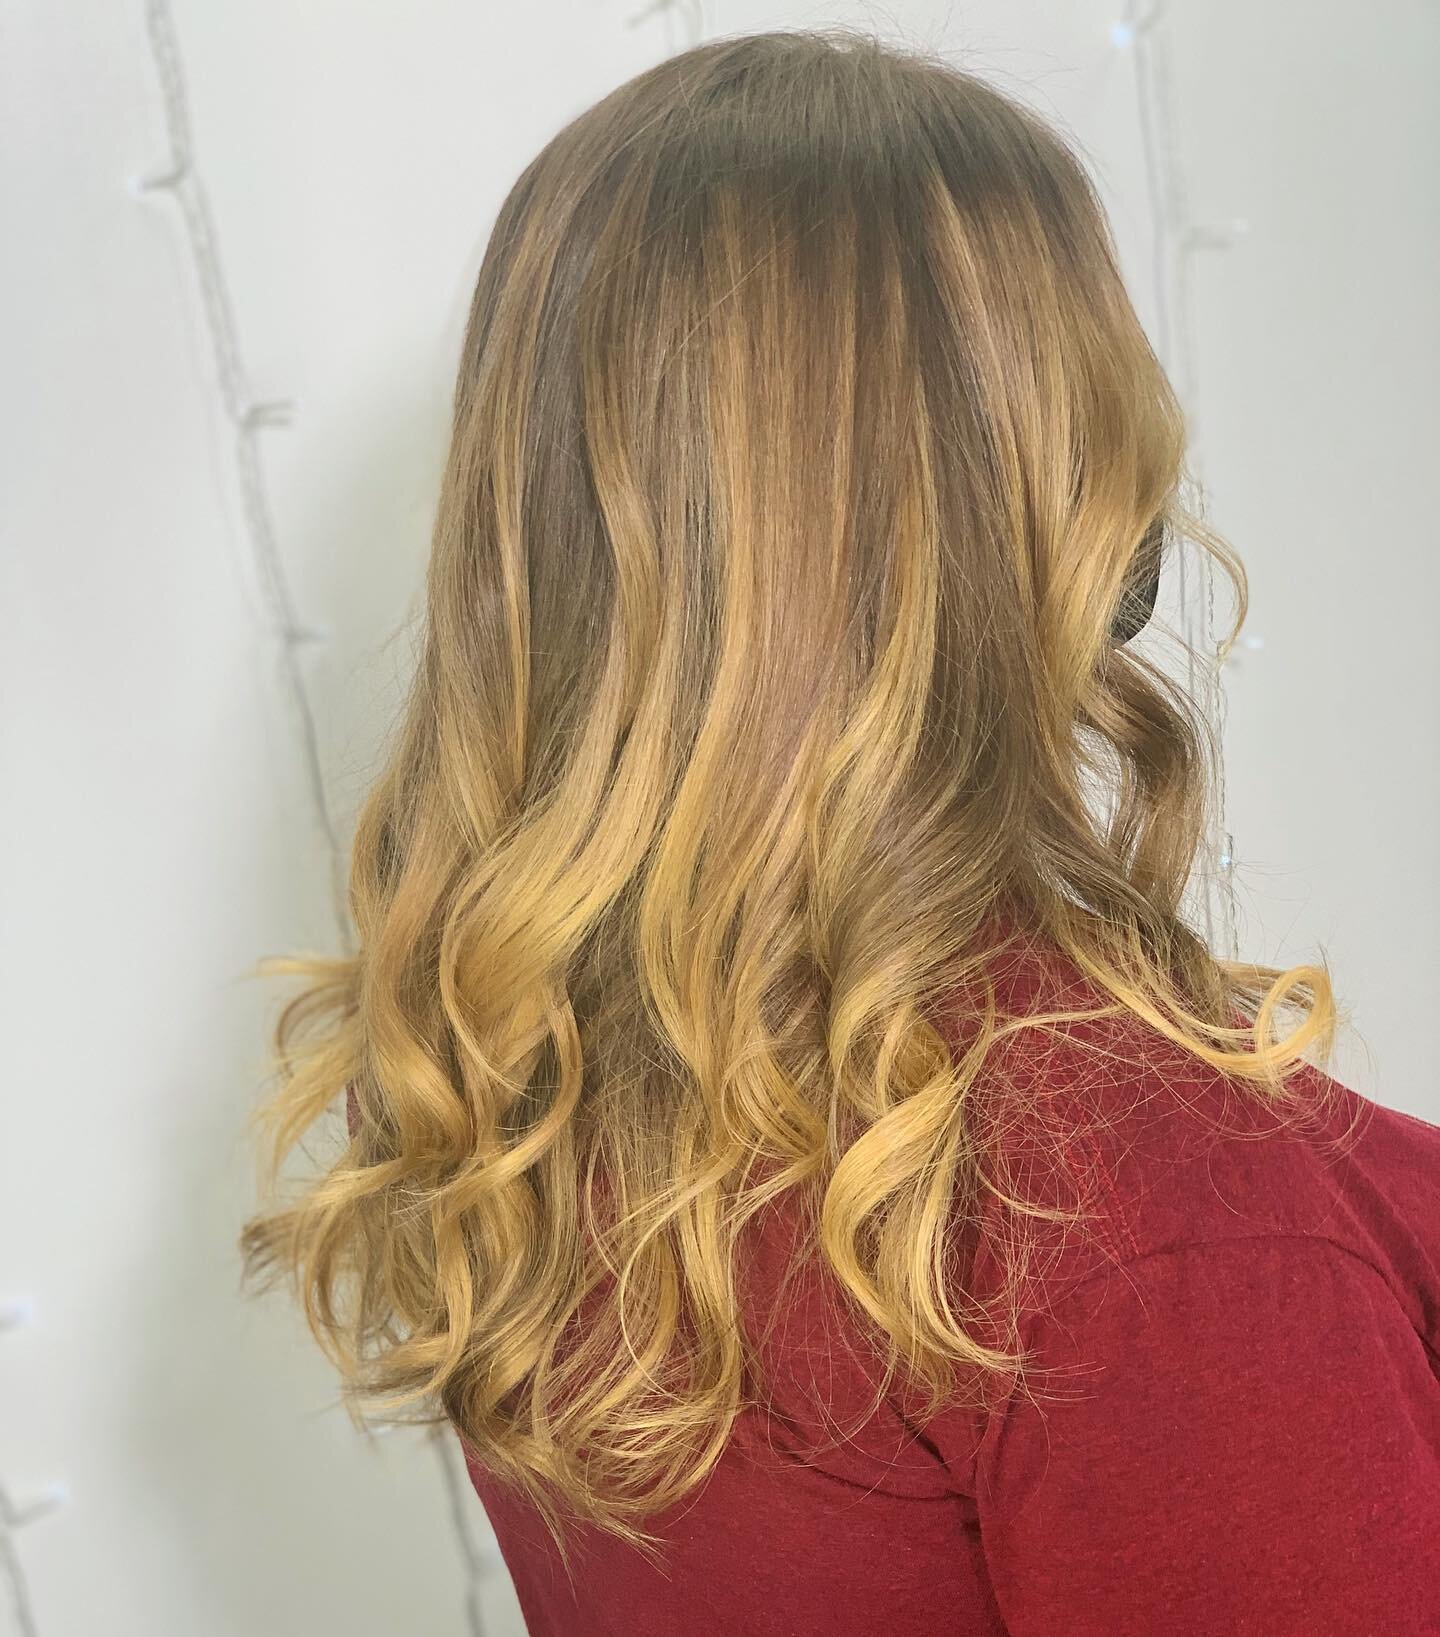 I know I am not suppose to have favorites, but this lovely lady has always been a joy to work with. Today she in trusted me with her FIRST color service ever! Added a lovely glow to match her person. 💕

#salon #urbanfrigesalon #chapelhill #chapelhil